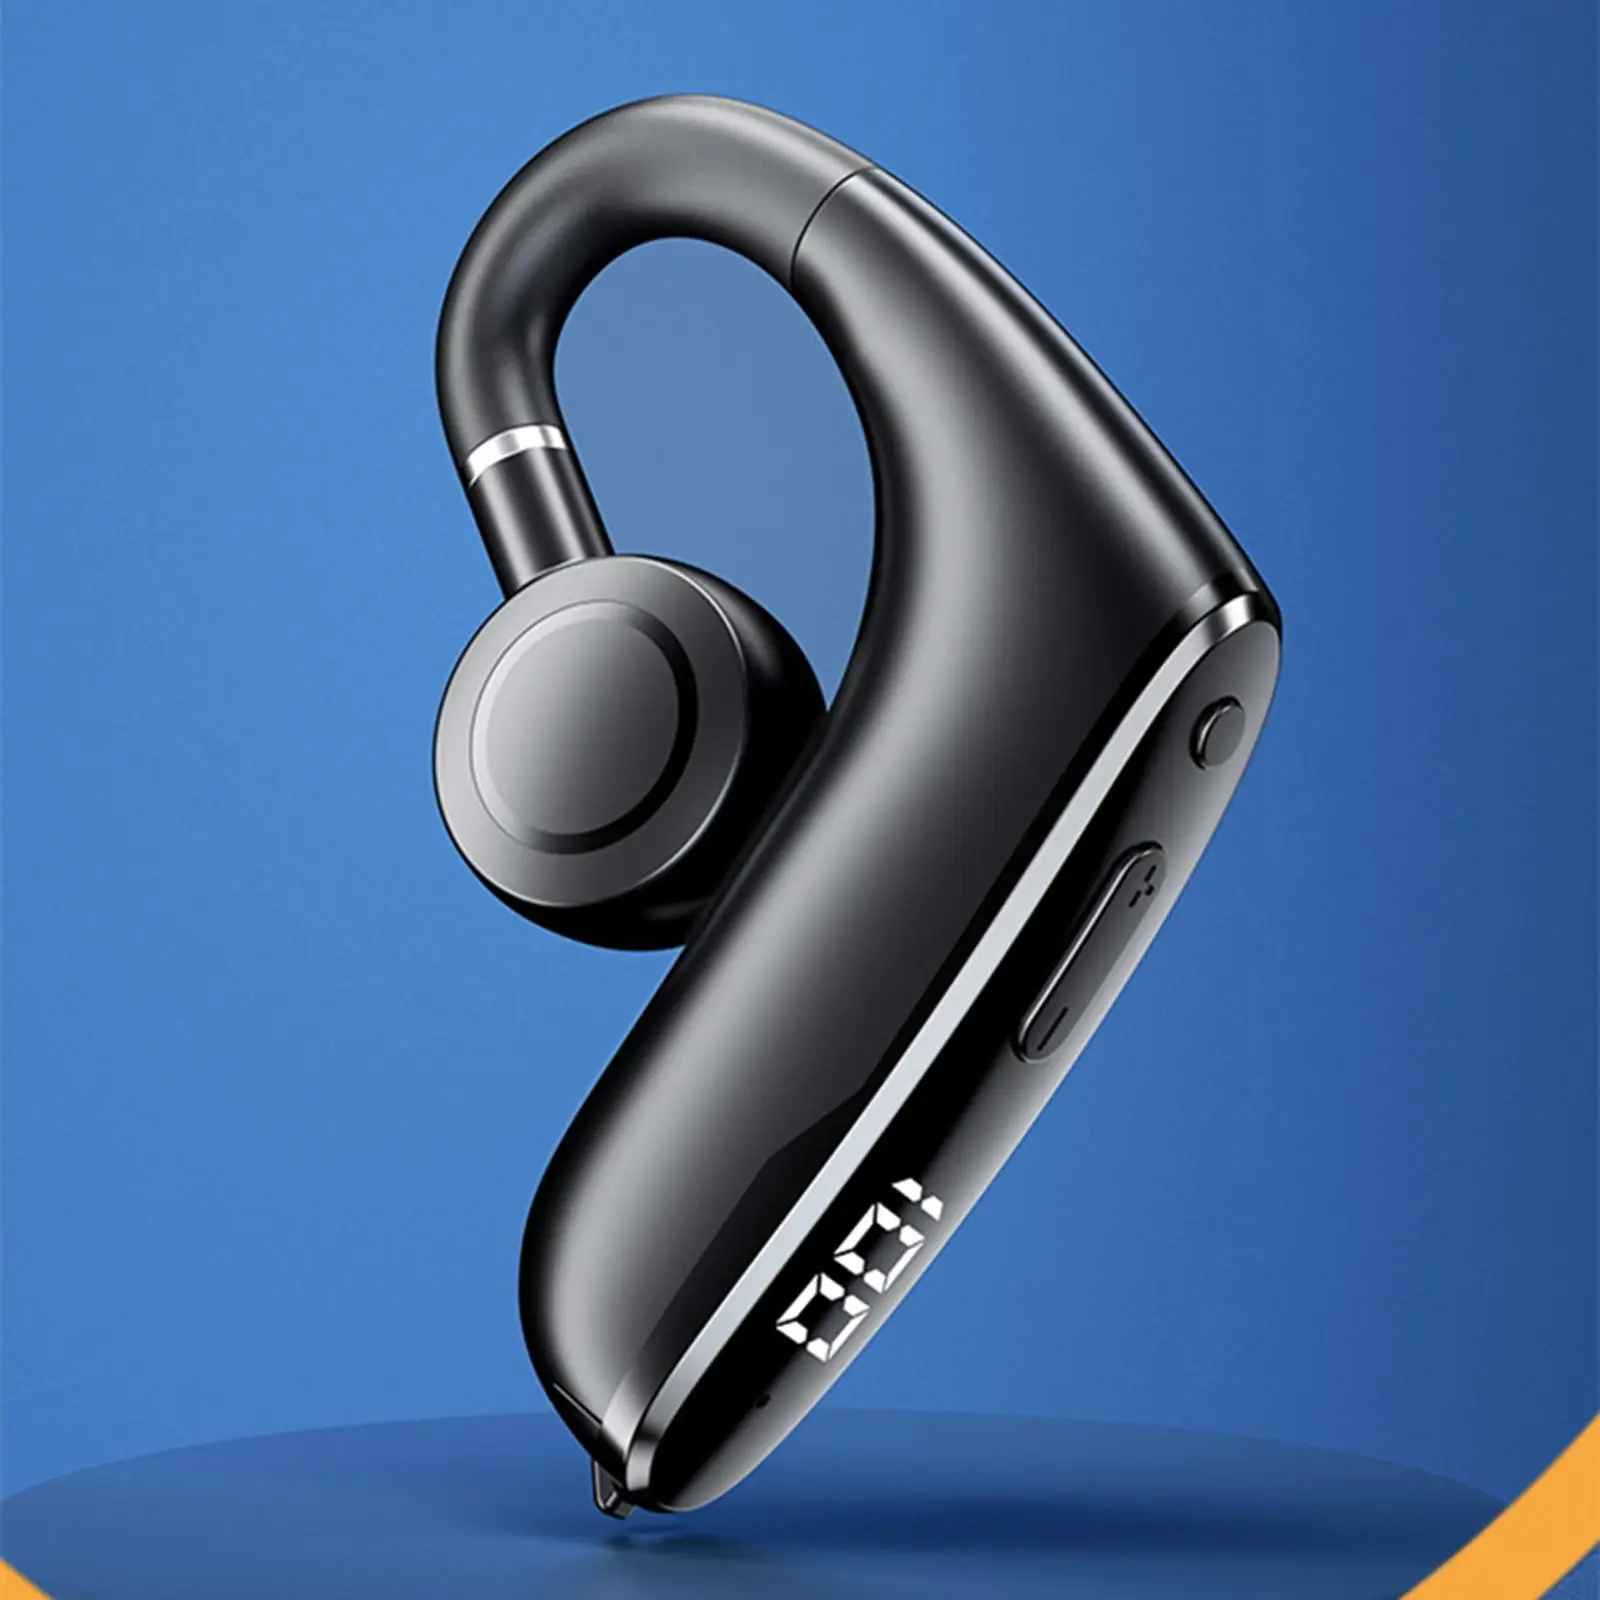 Bluetooth Headphones Handsfree 12 Hour Playtime Painless wearing Earhooks for Driving